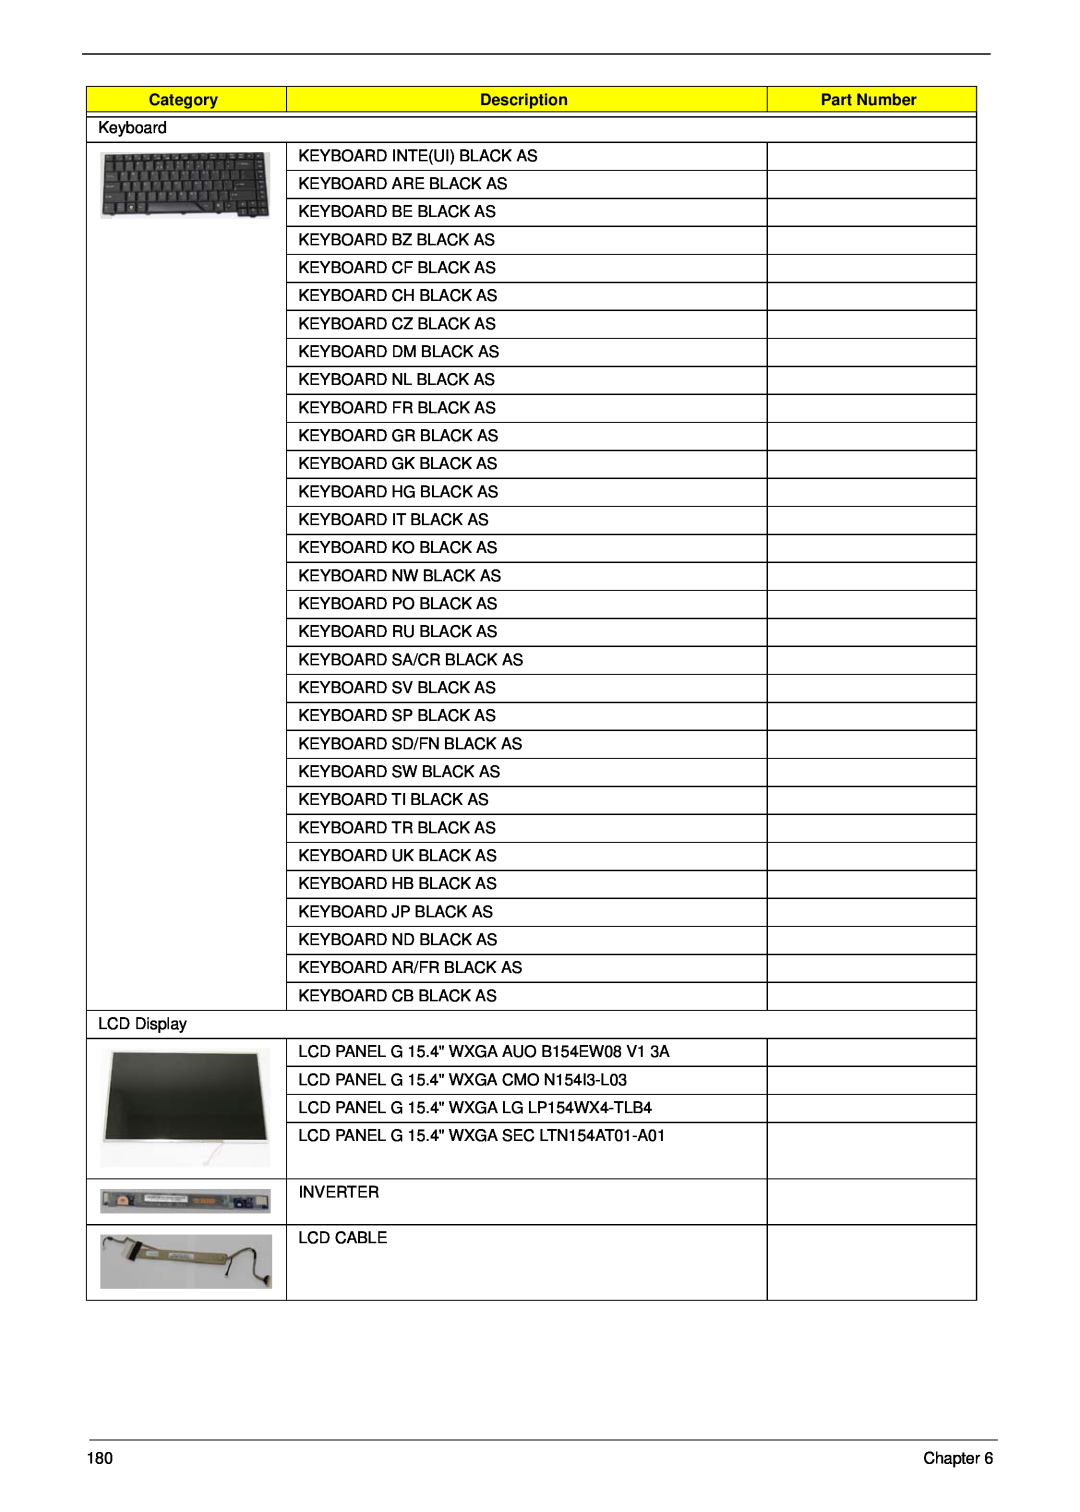 Acer 5530G manual Category, Description, Part Number, Keyboard KEYBOARD INTEUI BLACK AS KEYBOARD ARE BLACK AS 